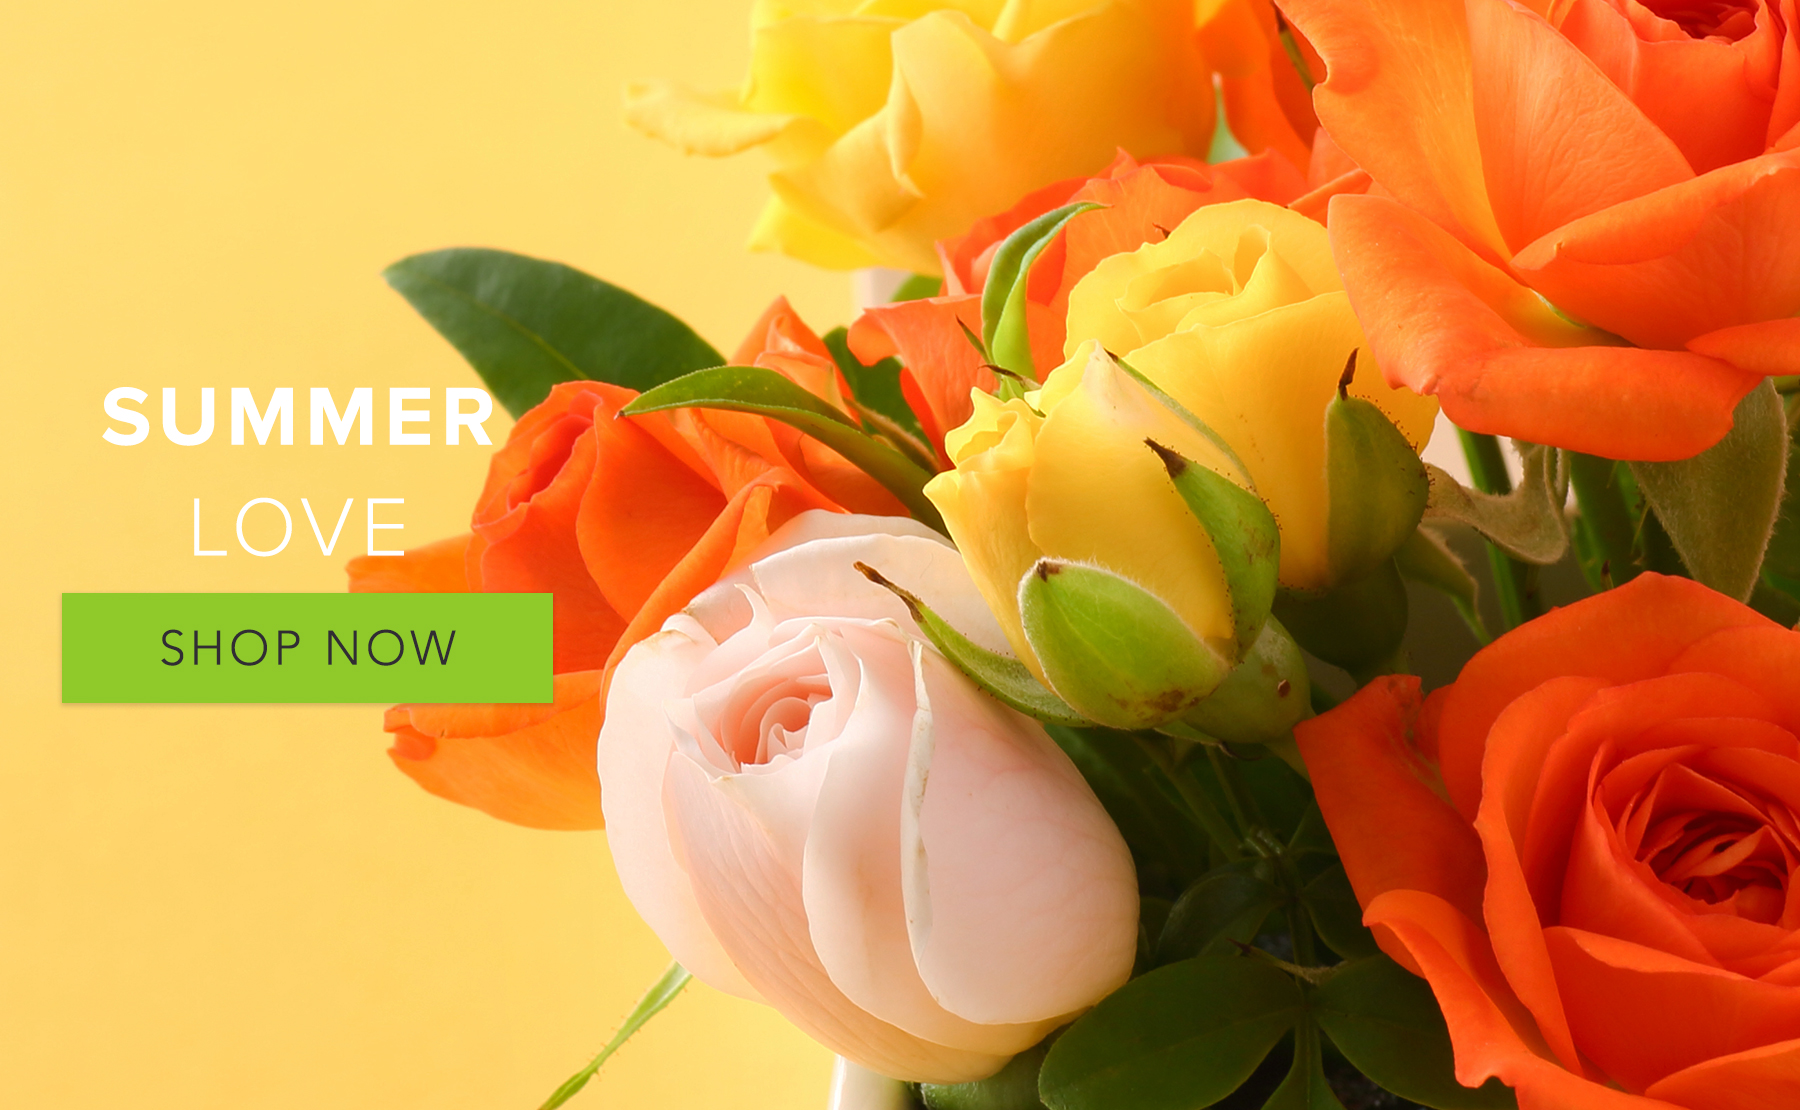 Olive Branch Florist | Flower Delivery by The Yellow Rose Florist